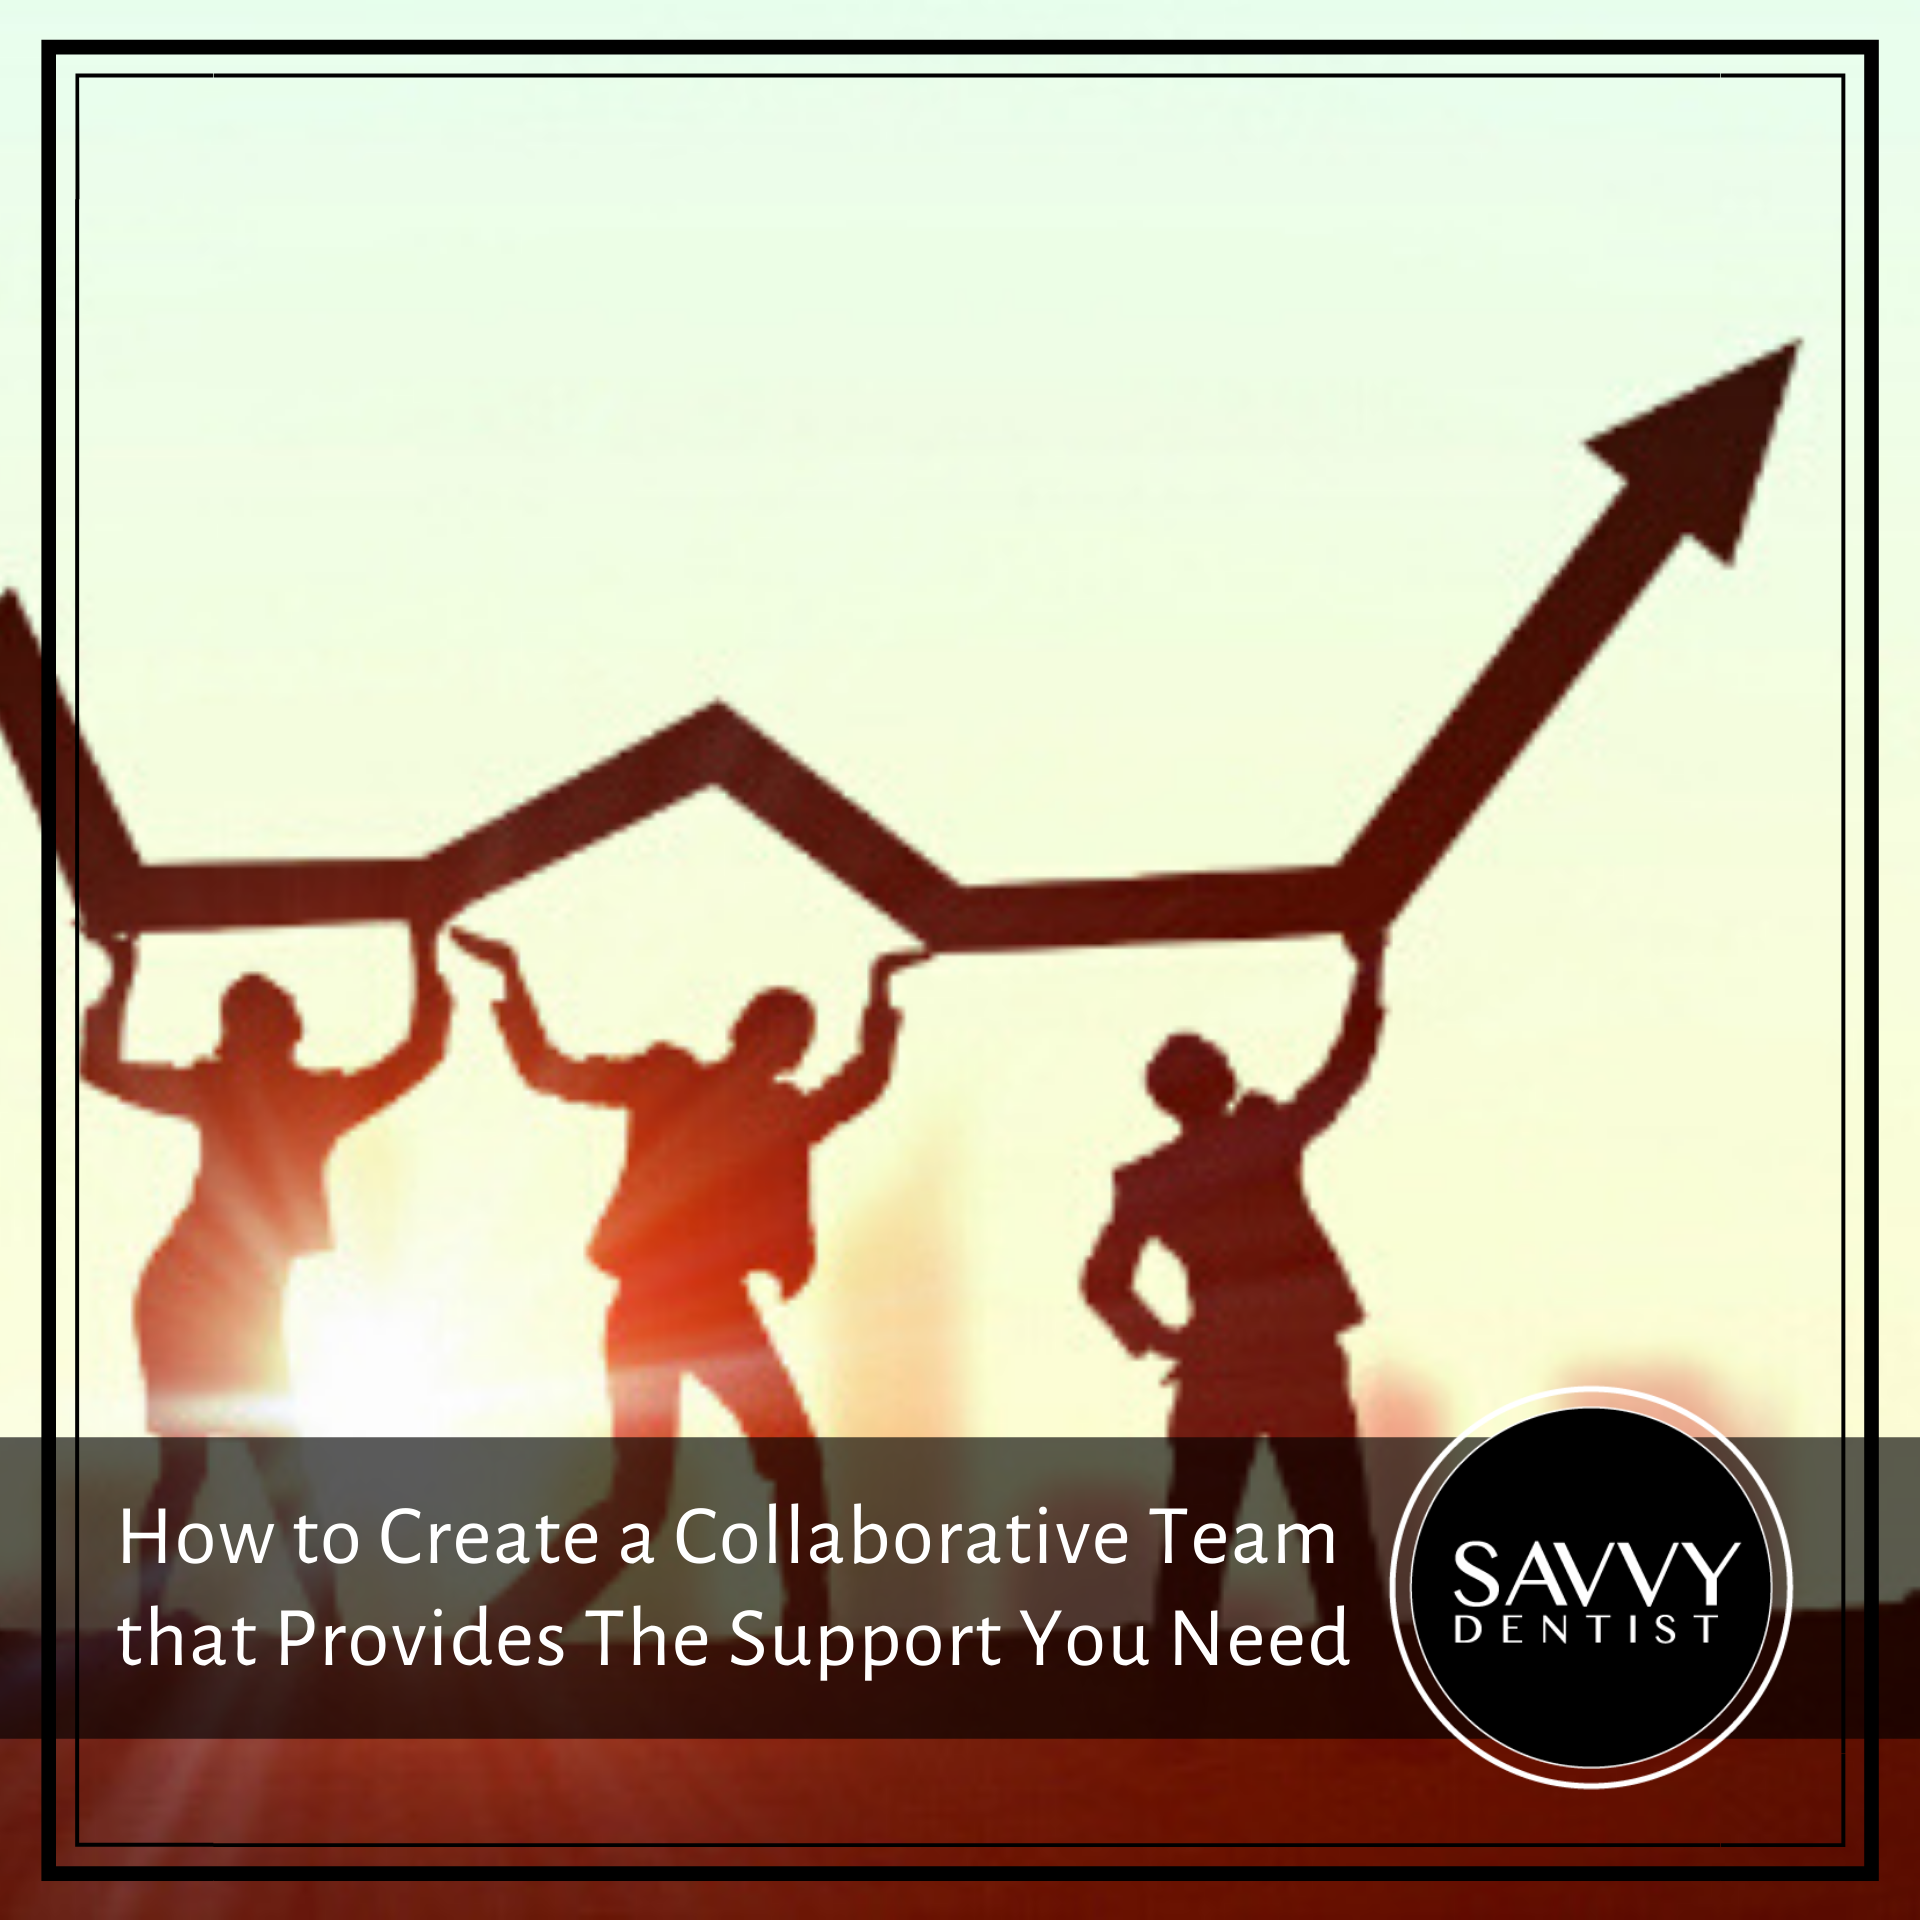 How to Create a Collaborative Team that Provides The Support You Need